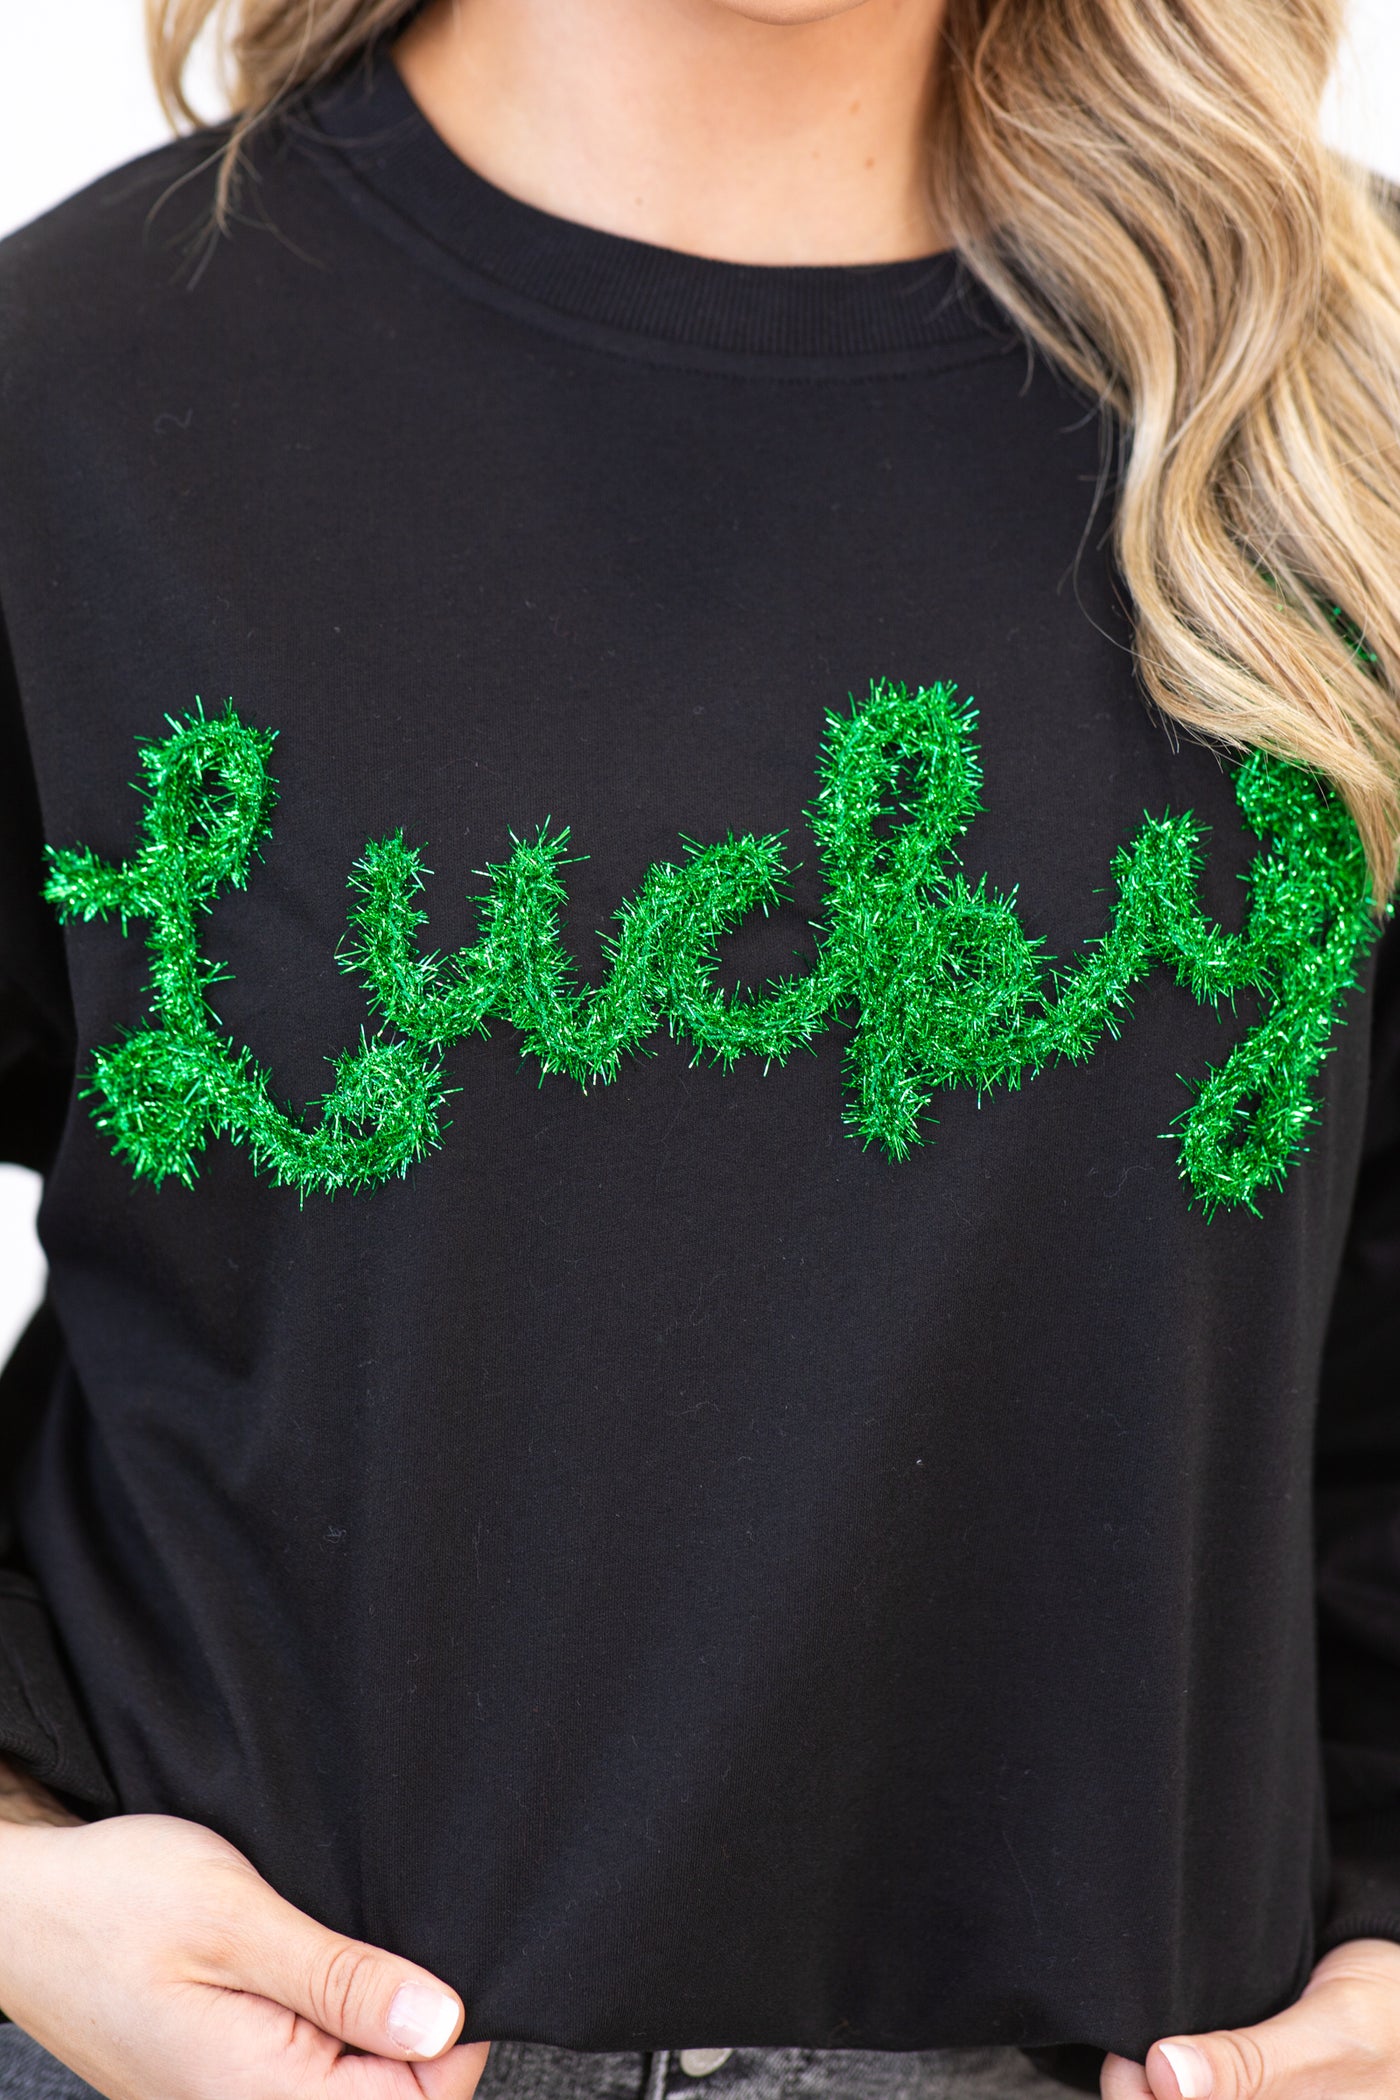 Black Lucky Graphic French Terry Sweatshirt